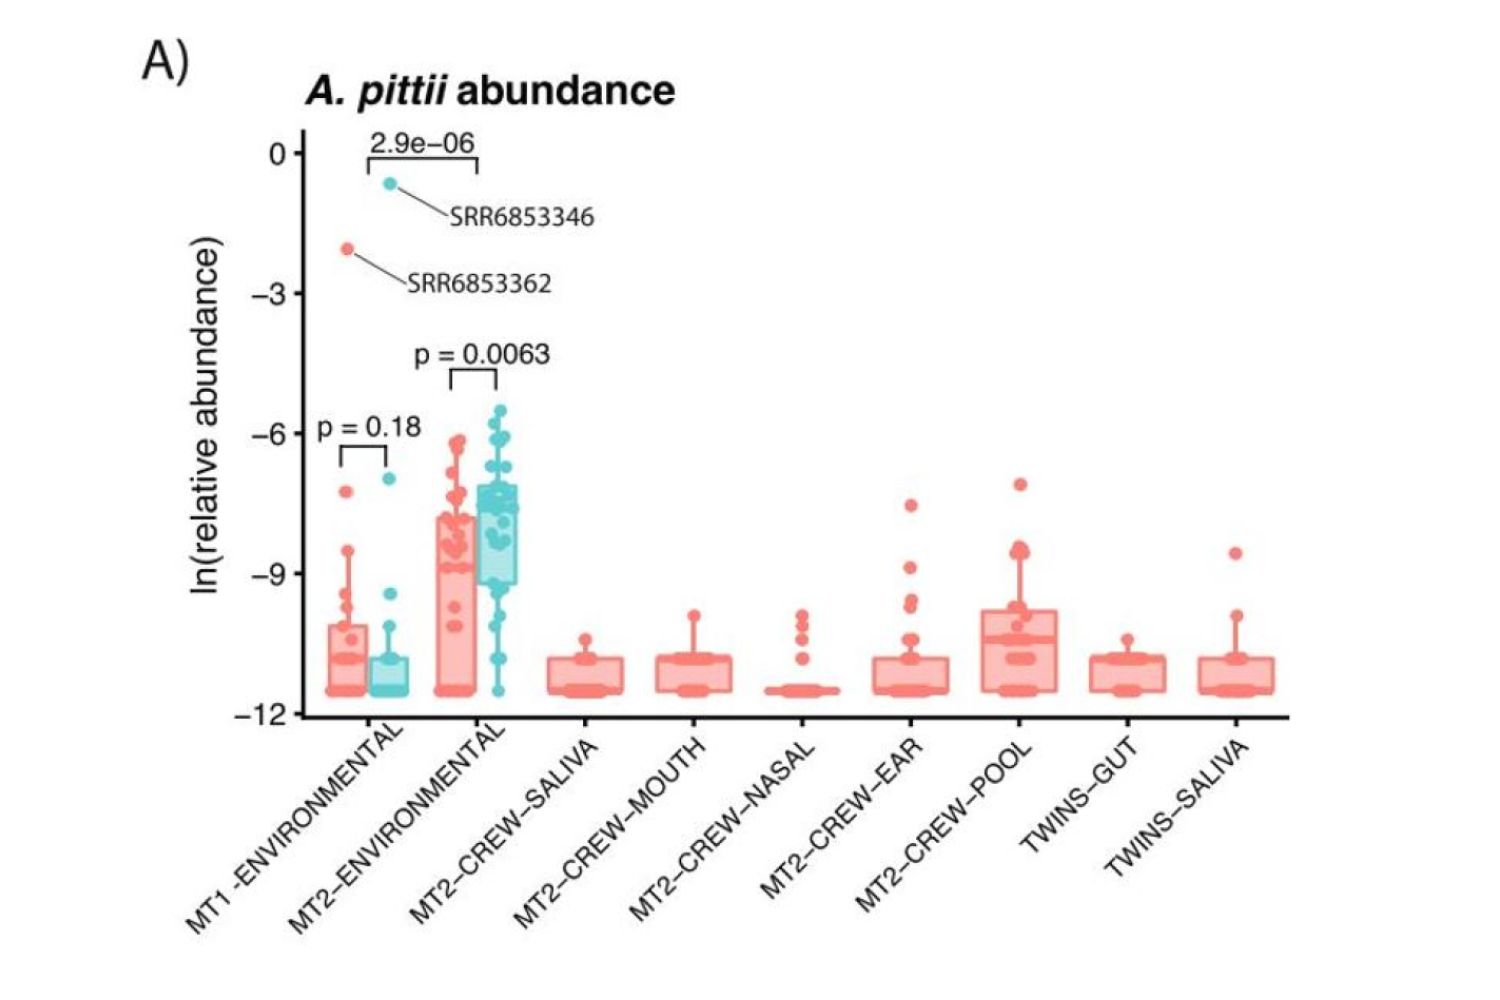 The relative abundance of  A. pittii across diferent metagenomes from human subjects as well as the ISS environment. The x-axis indicates the source of the metagenomes, with “pool” referring to combined samples across sites.